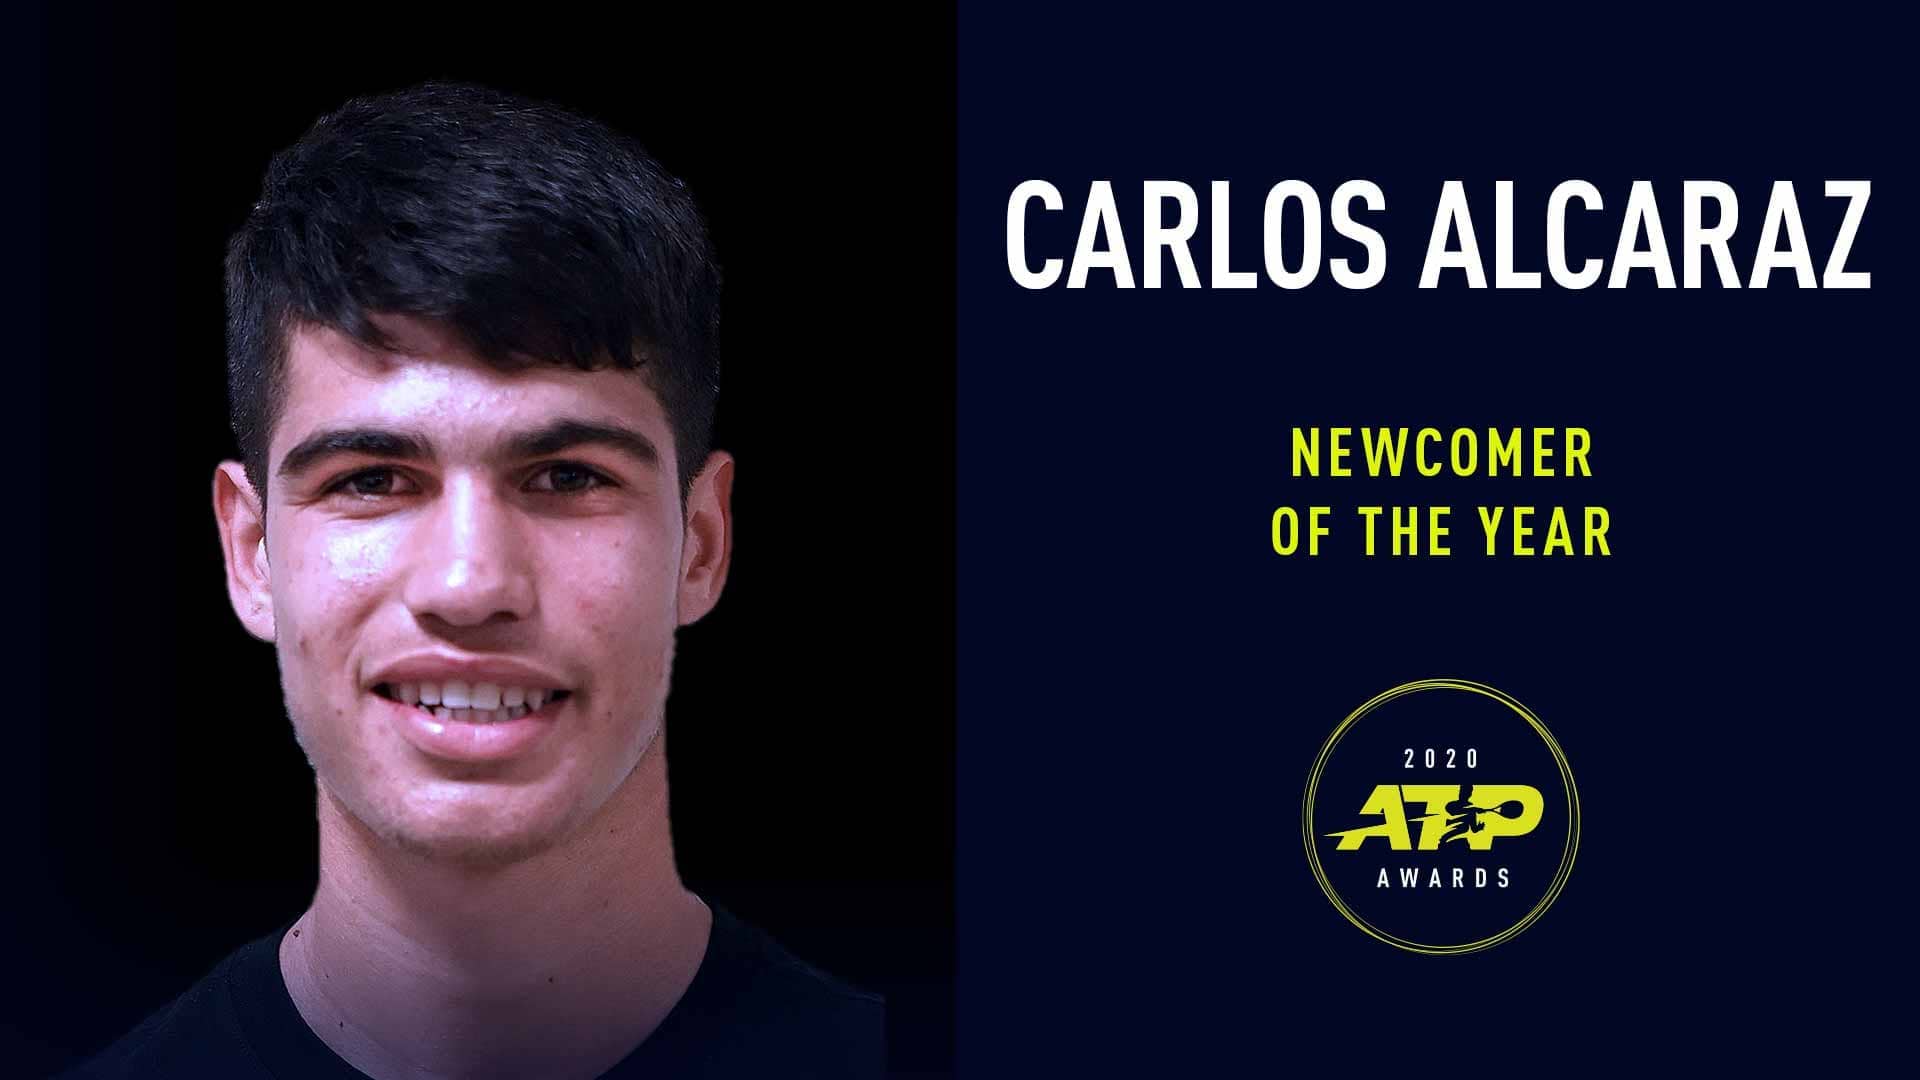 Carlos Alcaraz won ATP Challenger Tour titles in Trieste, Barcelona and Alicante in 2020.